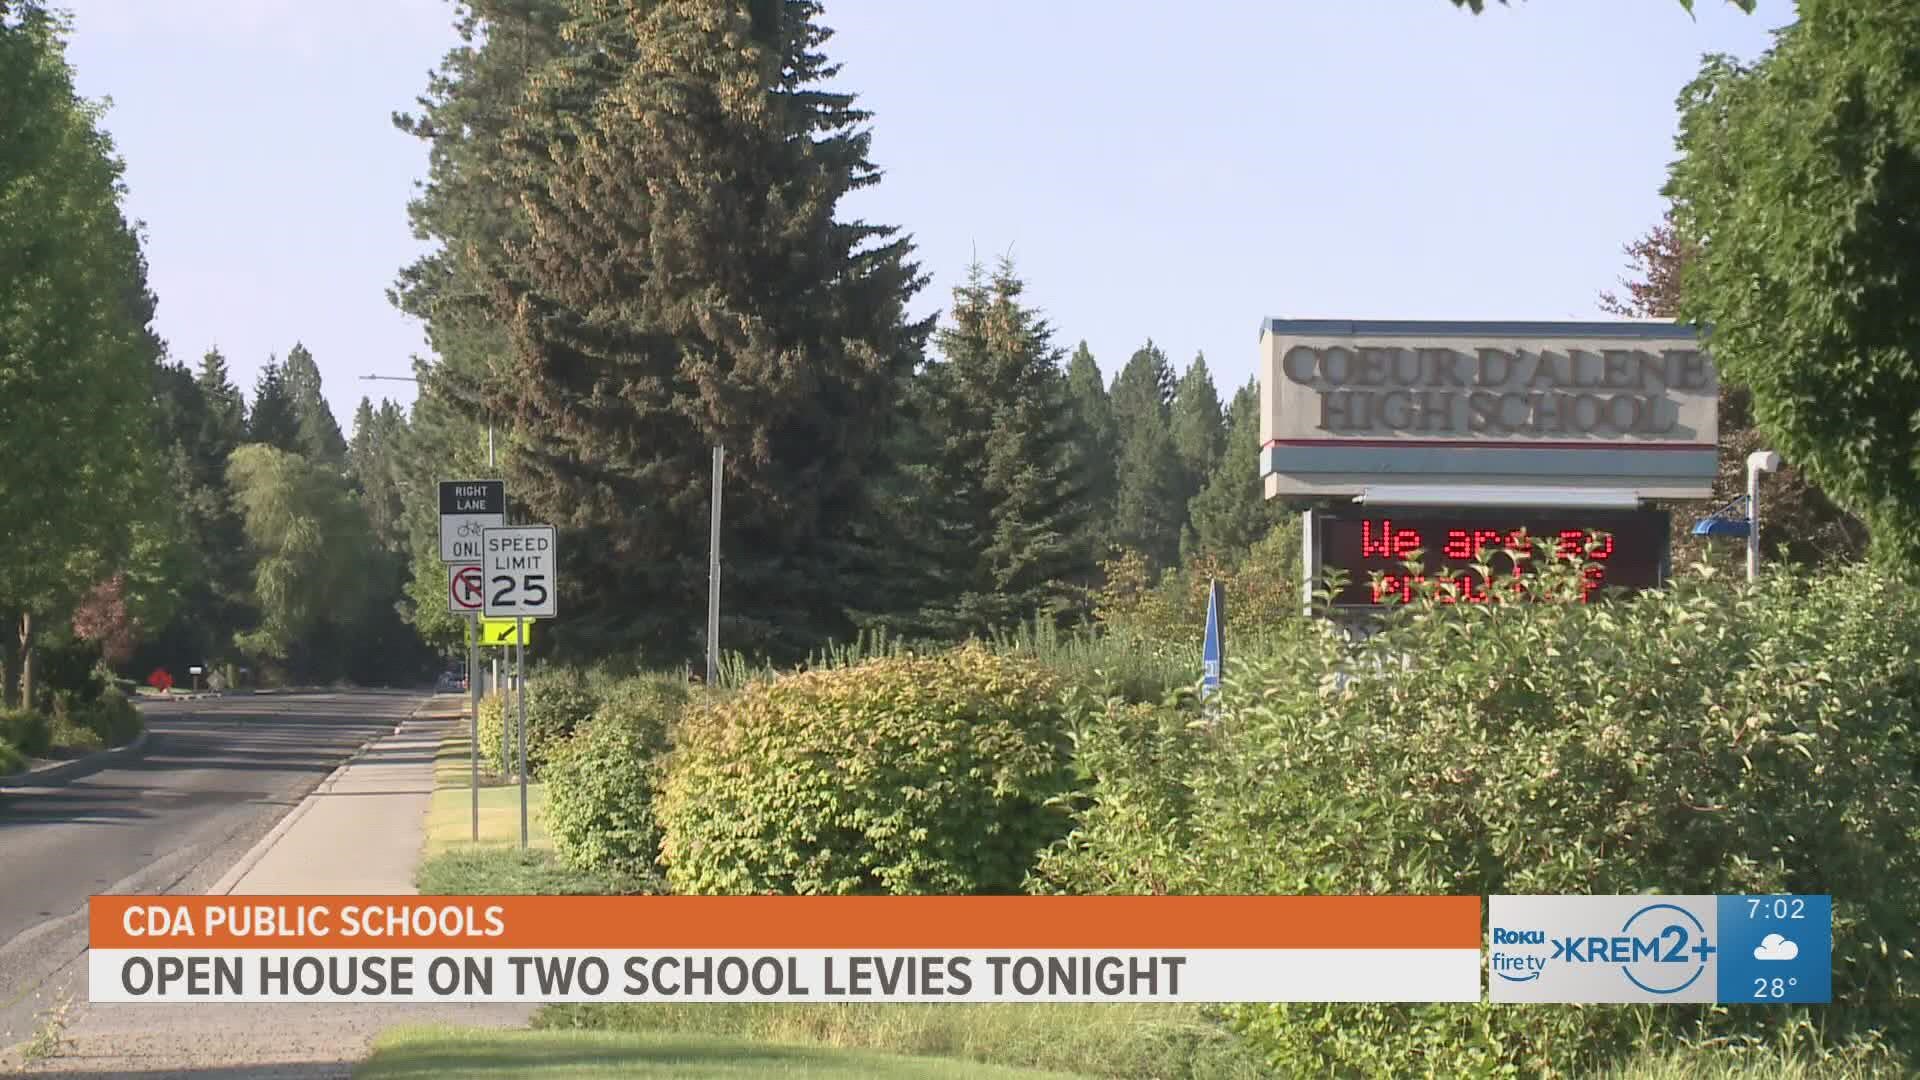 Coeur d'Alene Public Schools will host open houses to talk with the community about two school levies they will be voting on in less than two months.